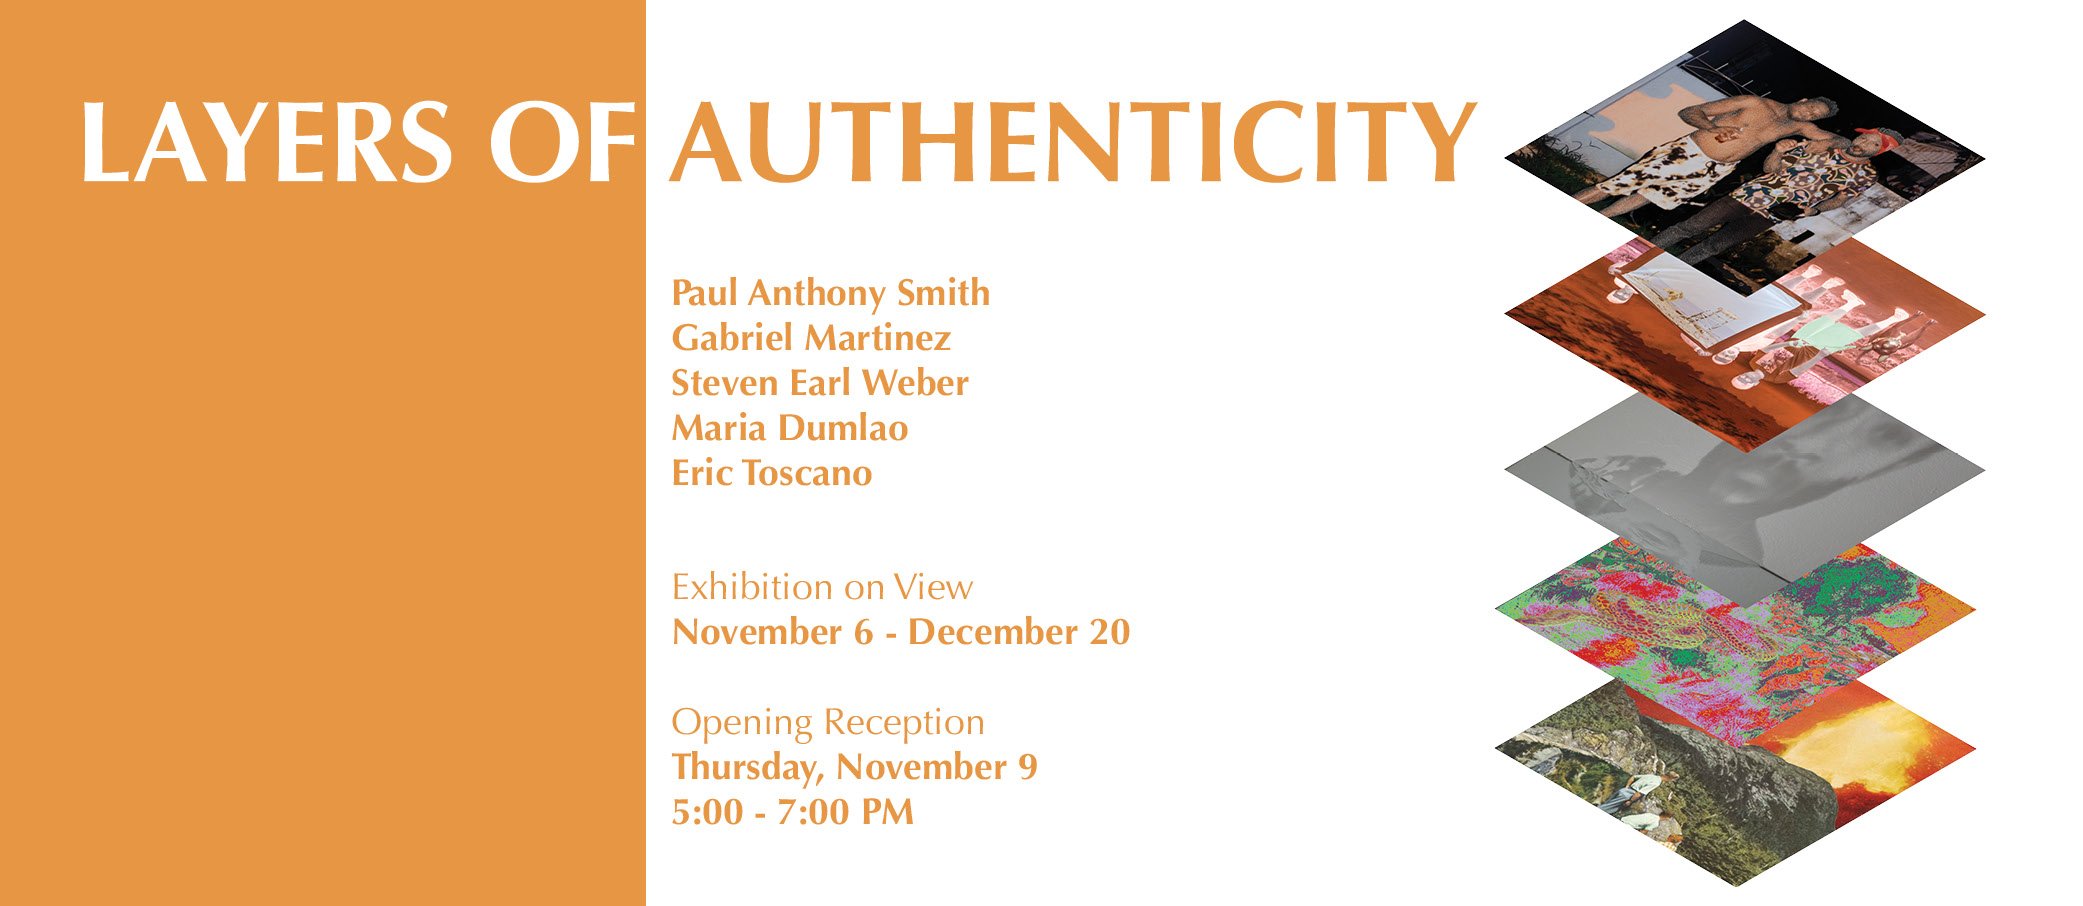 Layers of Authenticity